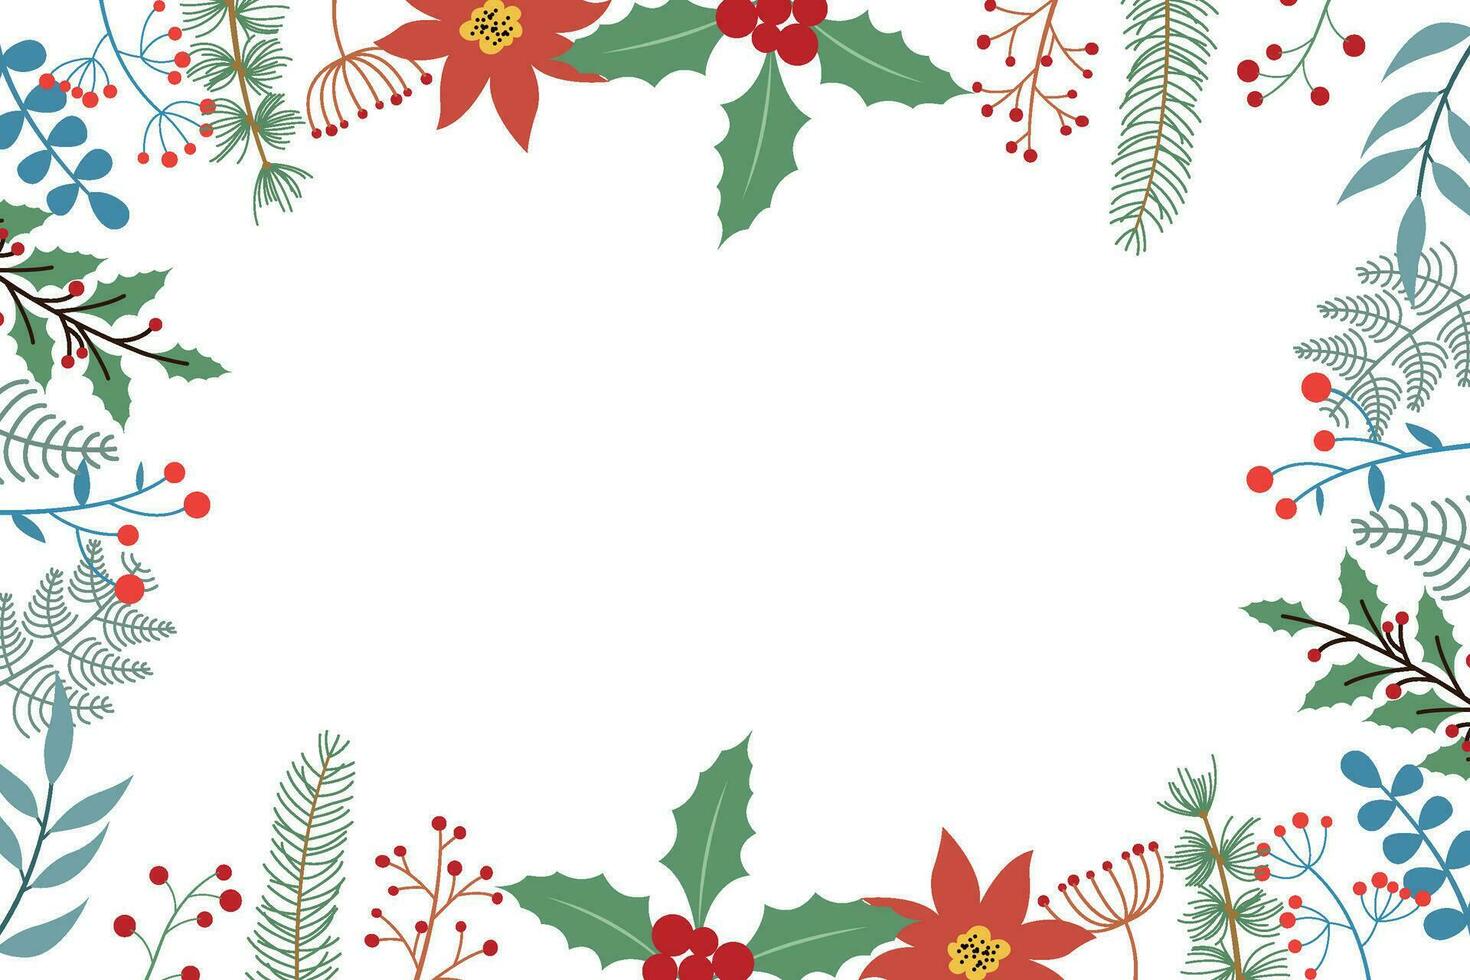 Flat Christmas background with Holly vector